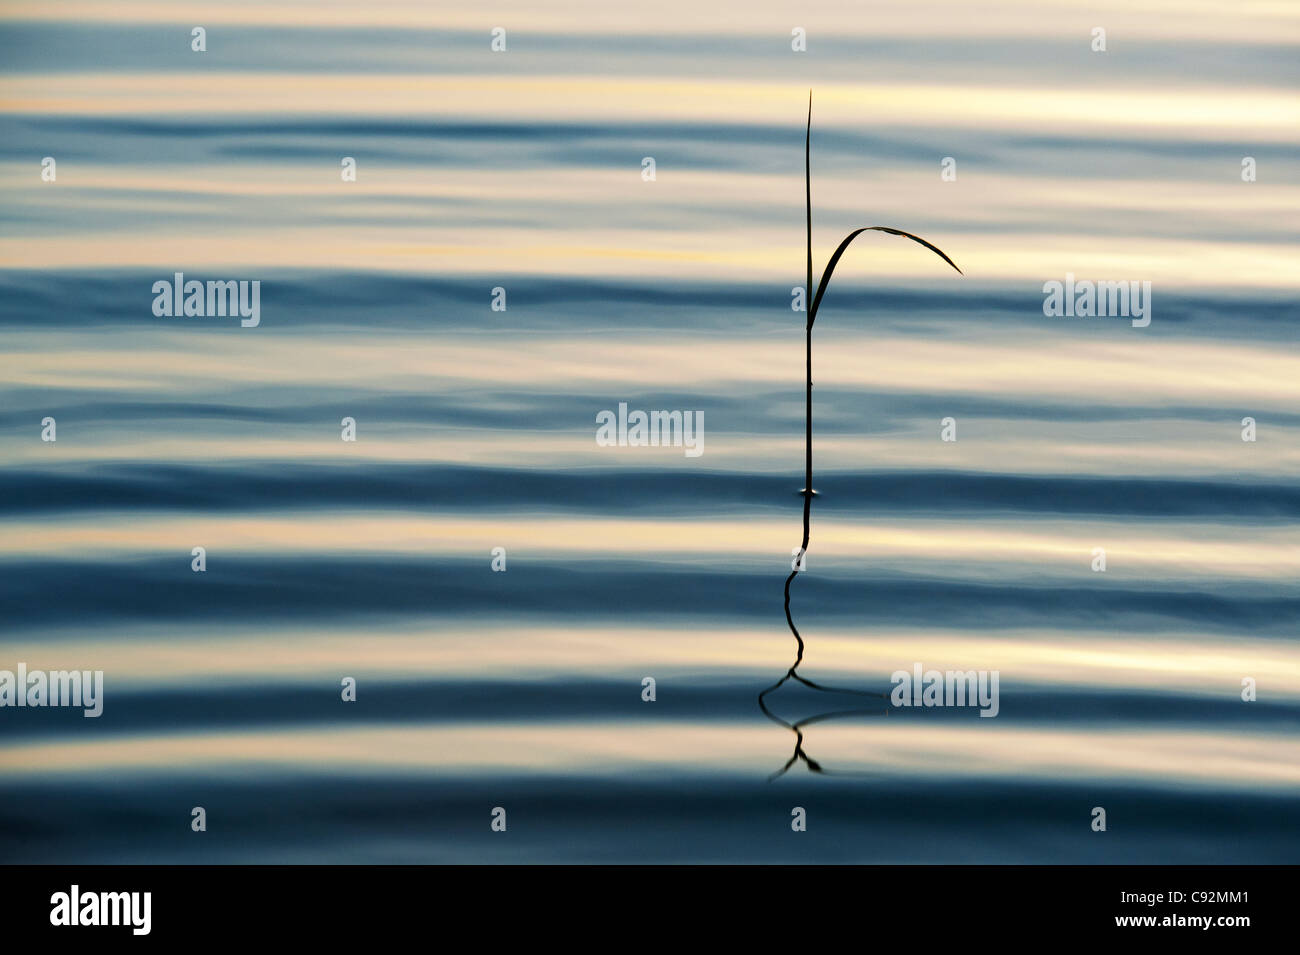 Sunset silhouette grass stem reflecting in a rippling pool india Stock Photo